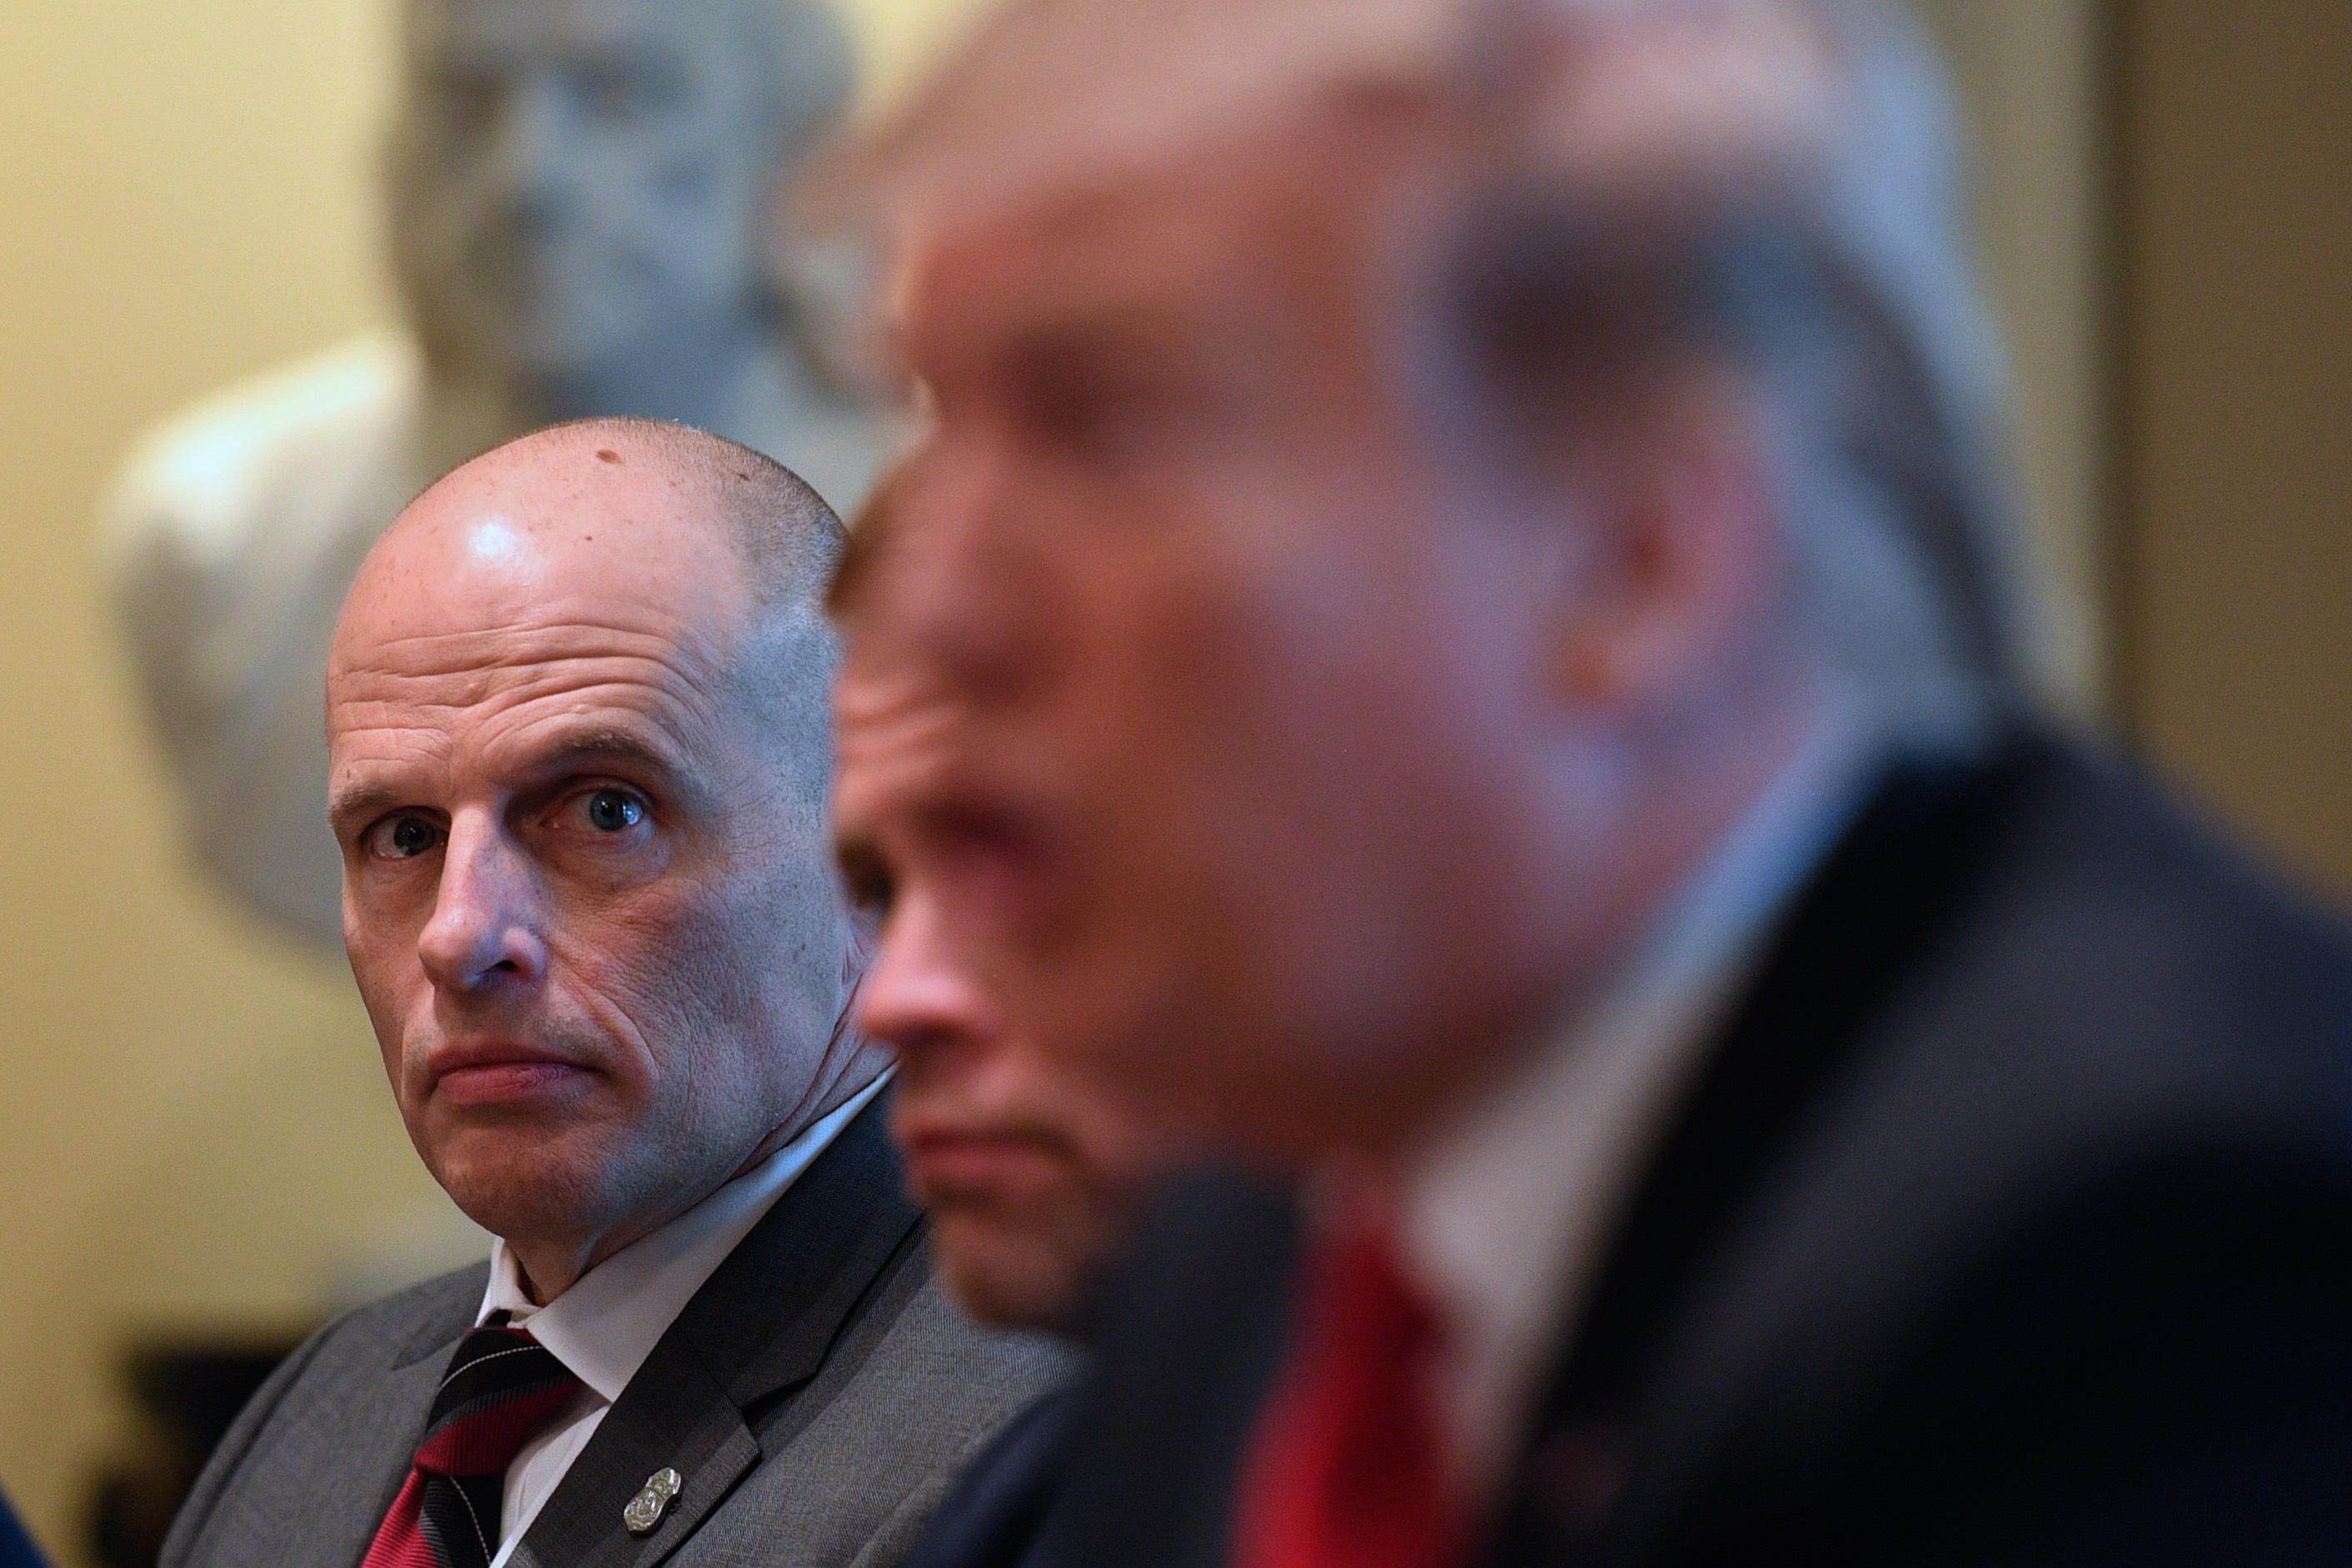 Ronald Vitiello, Acting Director of US Immigration and Customs Enforcement (ICE), listens as US President Donald Trump meets to discuss fighting human trafficking on the southern border Washington, DC, on February 1, 2019. (JIM WATSON&mdash;AFP/Getty Images)